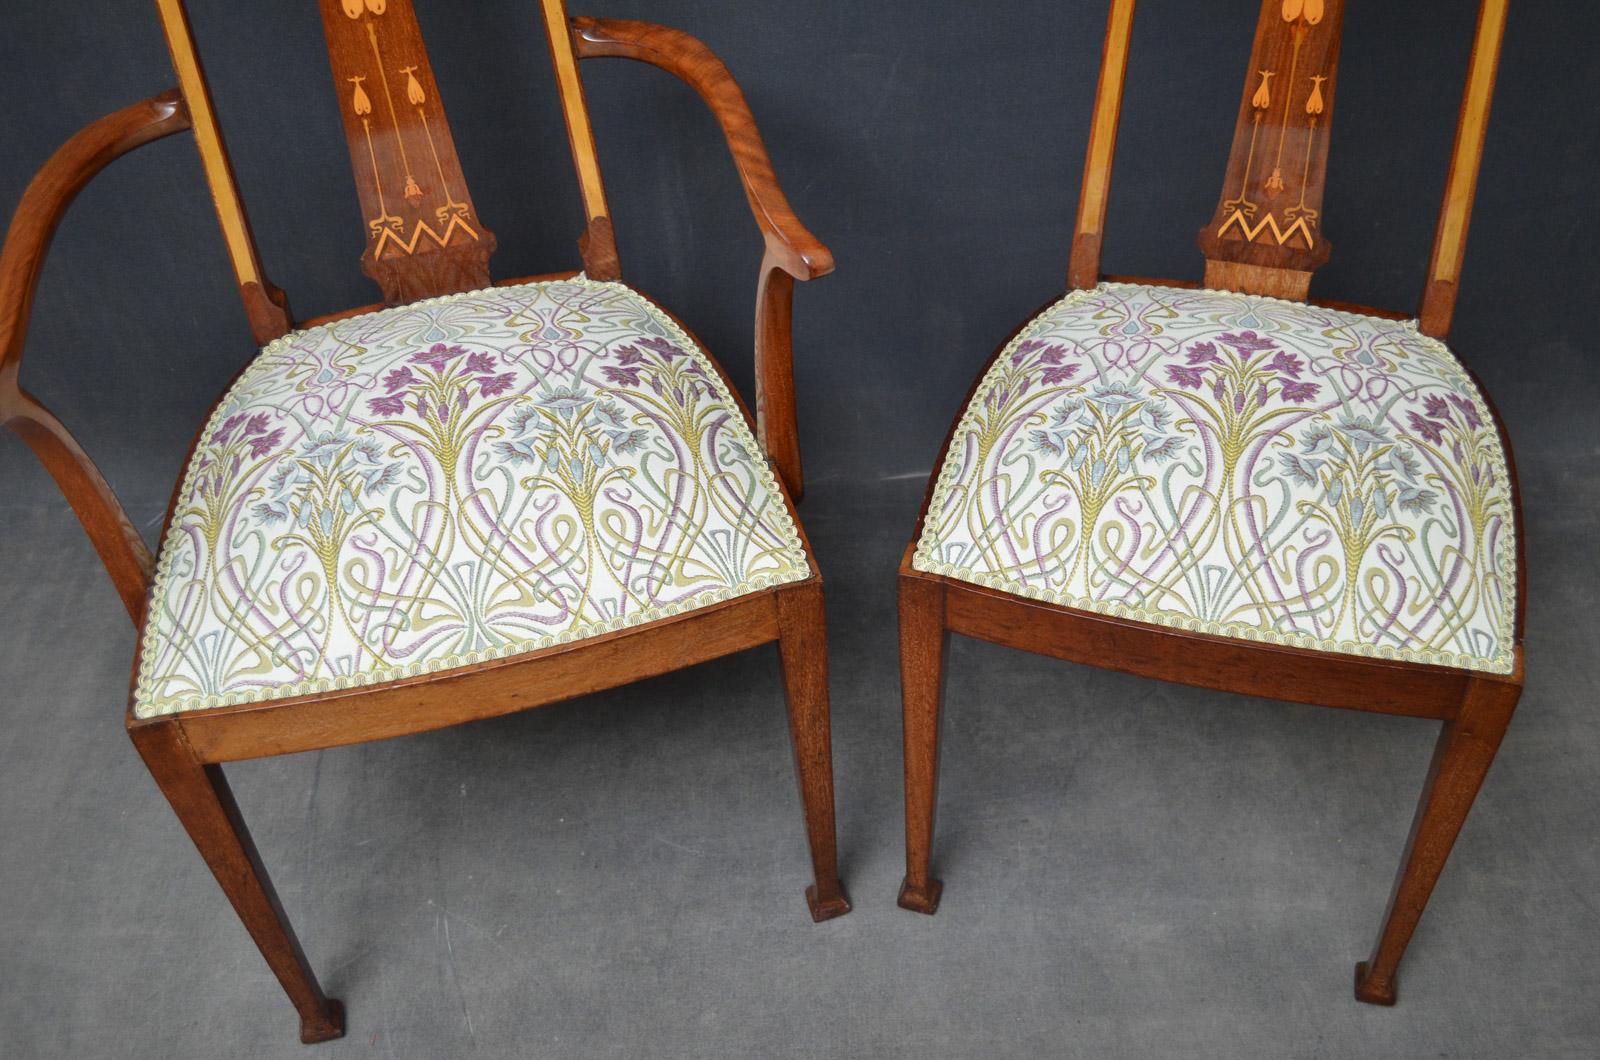 Pair of Art Nouveau Chairs in Mahogany For Sale 3